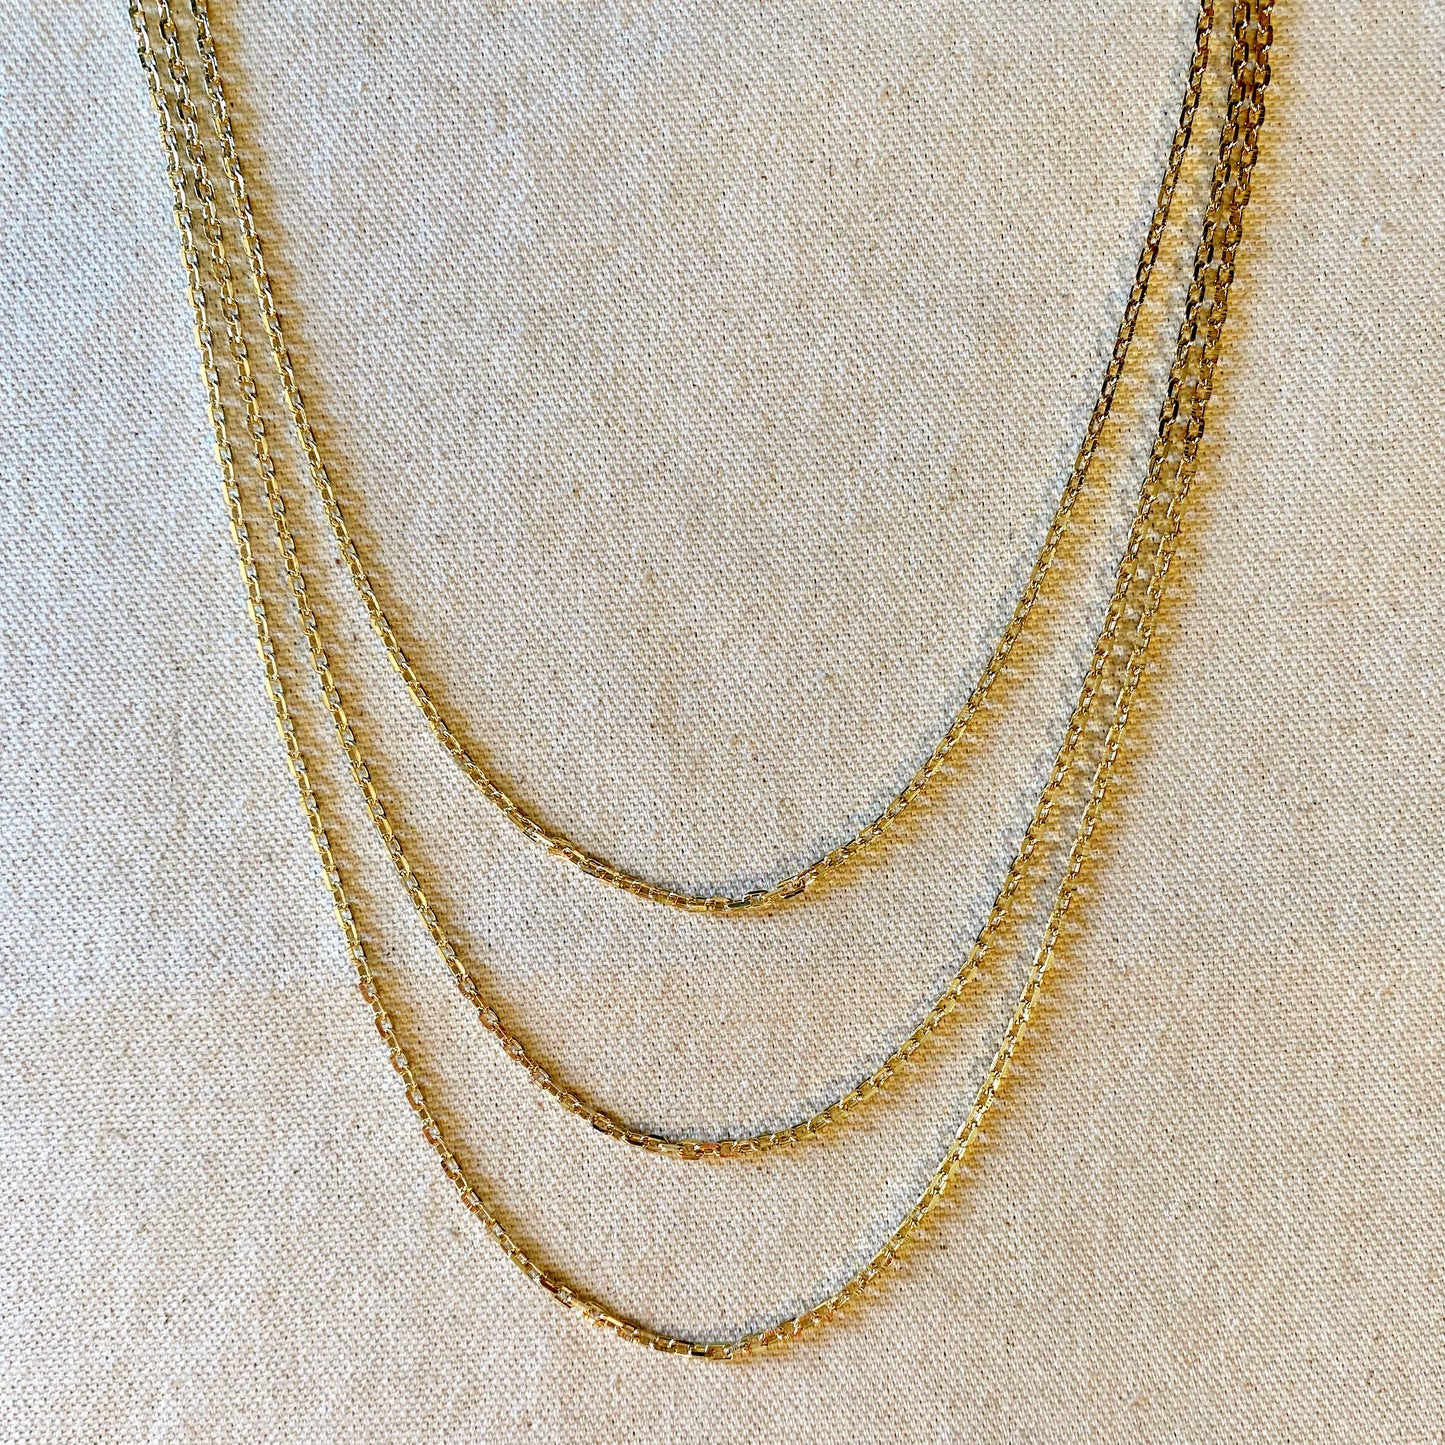 18k Gold Filled DC Curb Link Chain